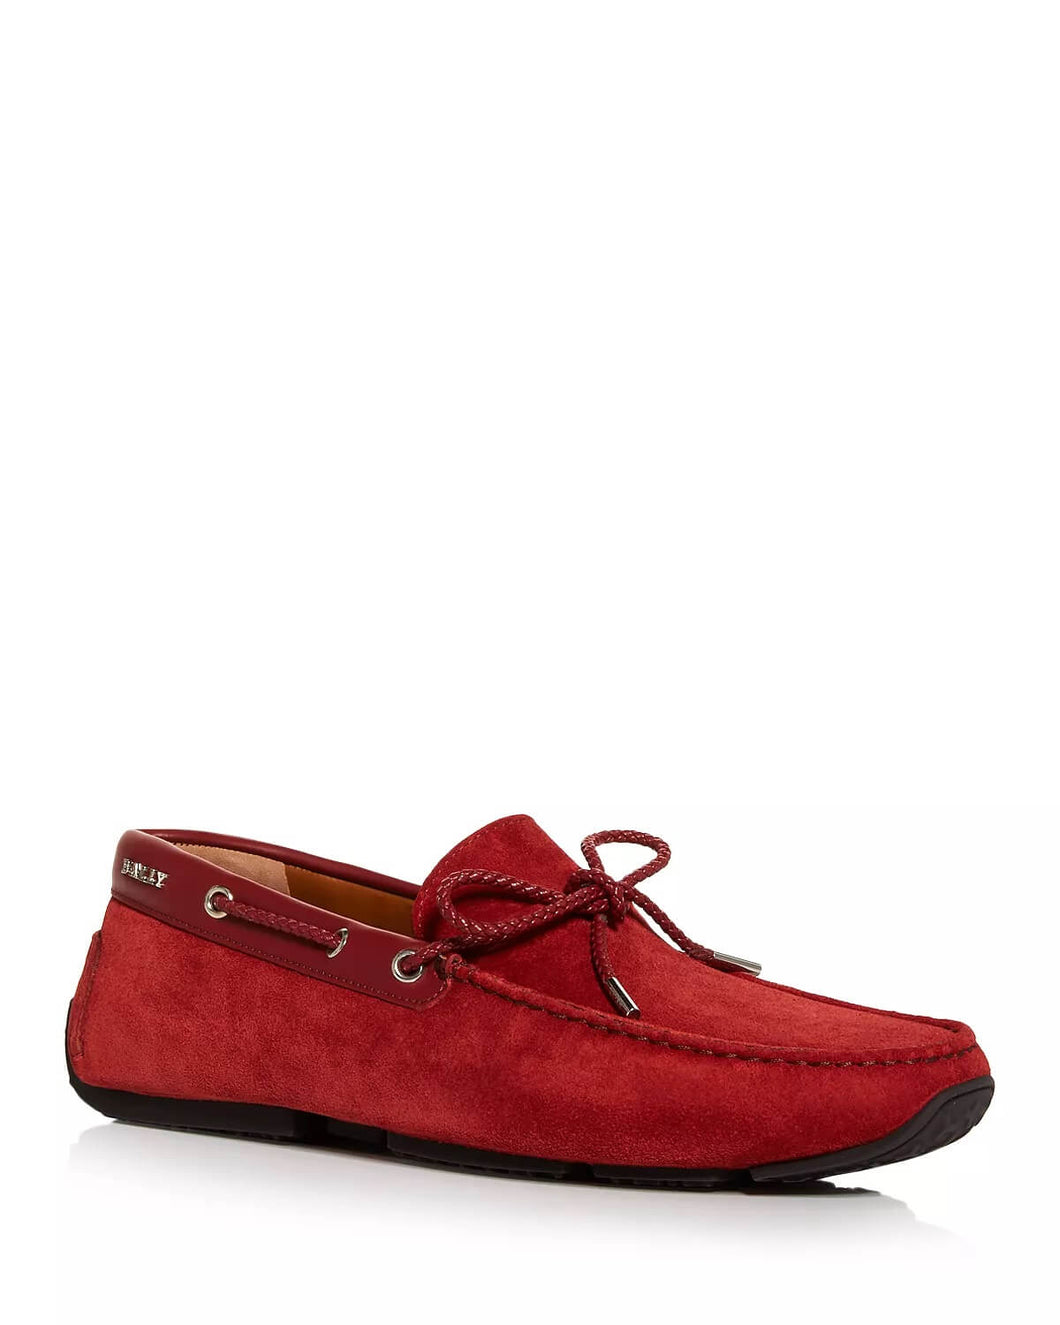 NEW Bally Pindar Men's 6231347 Red Leather Suede Drivers US 11.5 MSRP $475